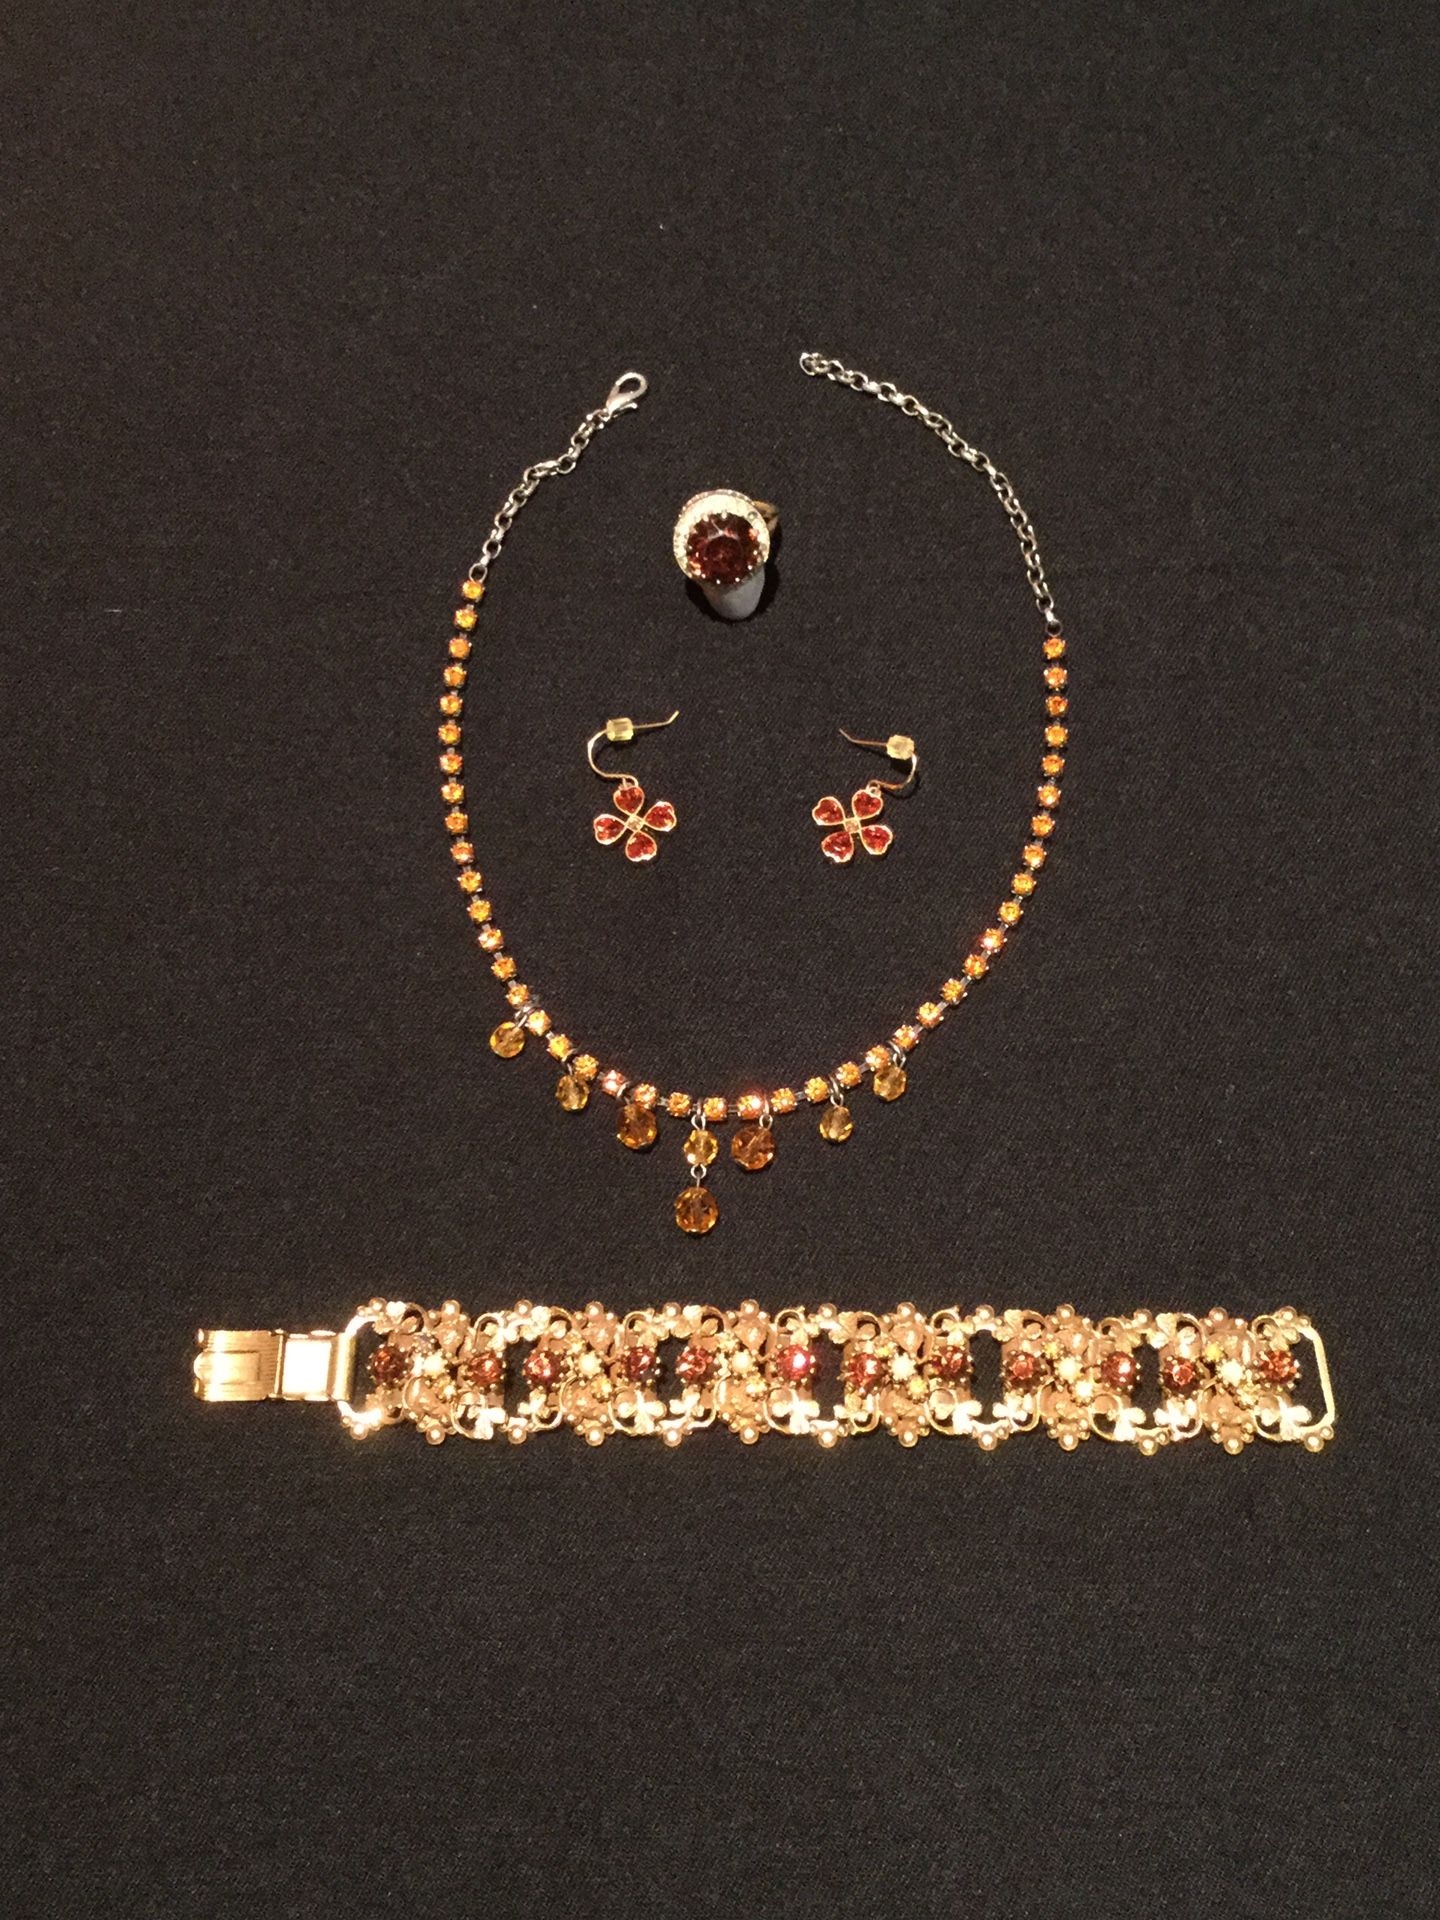 Custom jewelry with amber stones necklace, earrings, bracelet and ring